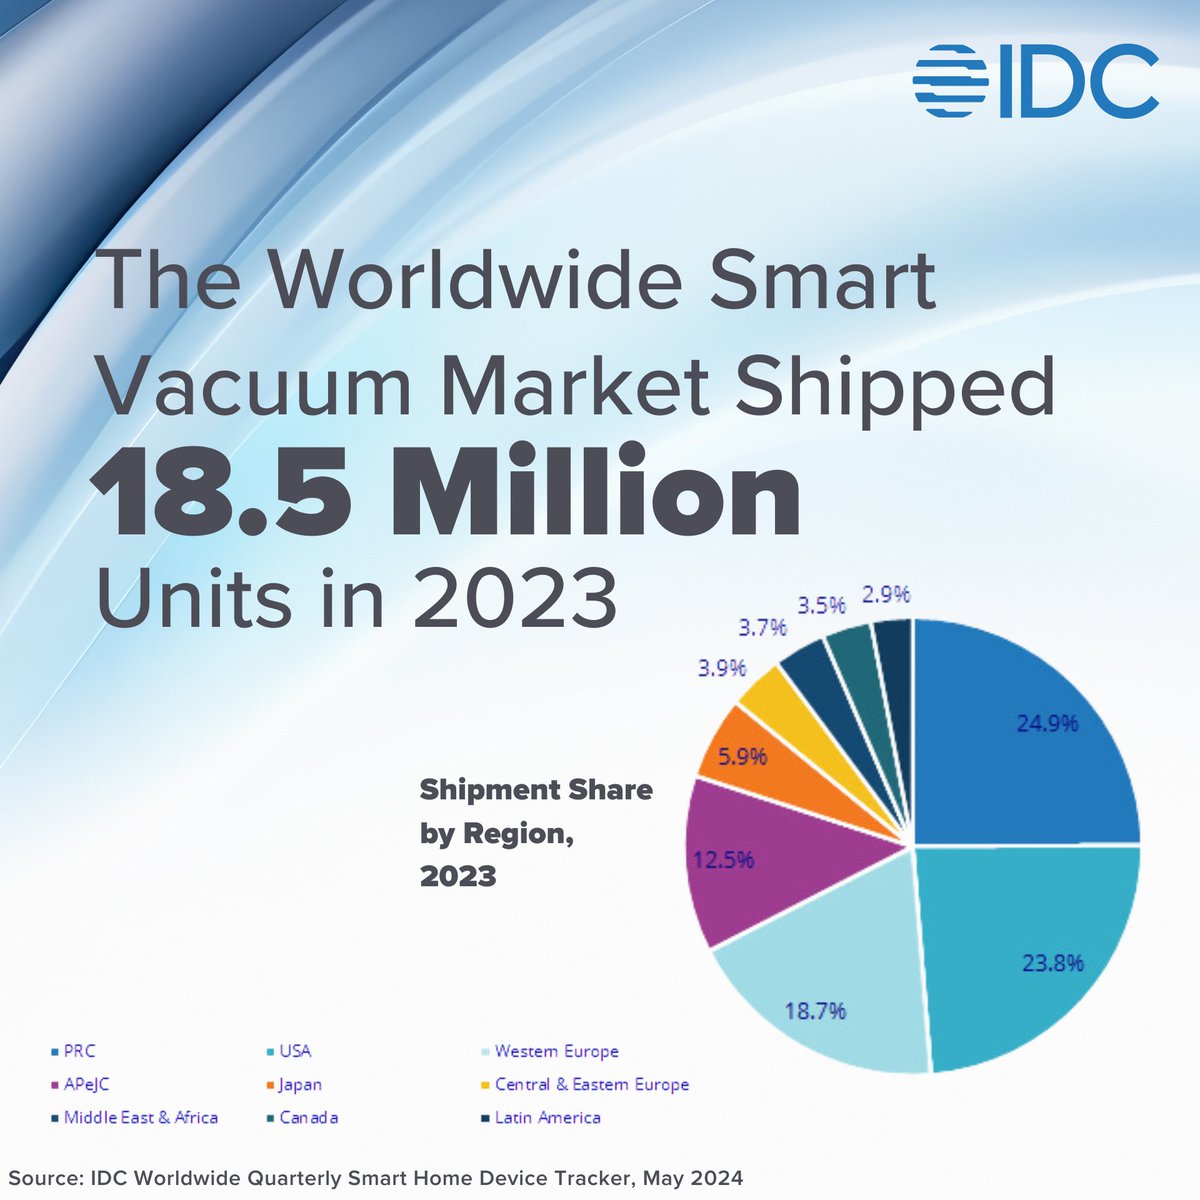 'Competition has continued to grow within the smart vacuum market, displacing the need for traditional vacuums in many homes,' says Quorra Liu, senior analyst for Client Systems Research at IDC China in IDC's latest press release. Learn more: ow.ly/PbhA50RFWyb